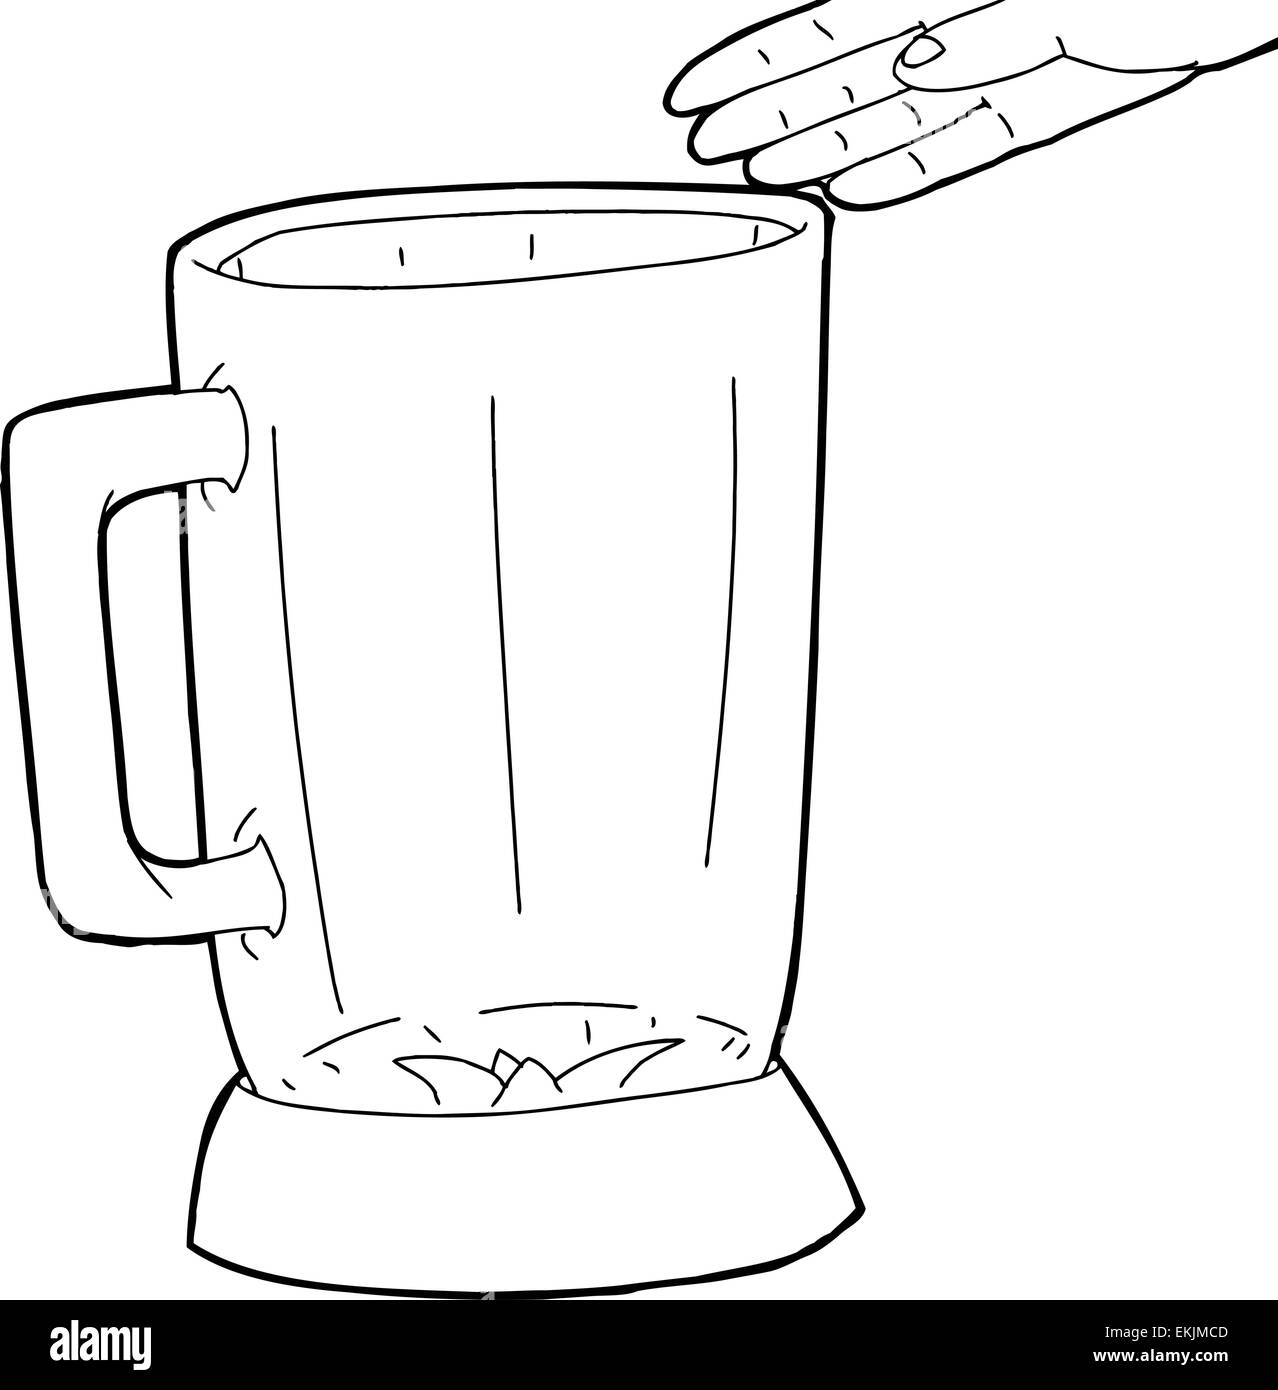 Hand drawn hand over empty blender outline Stock Photo